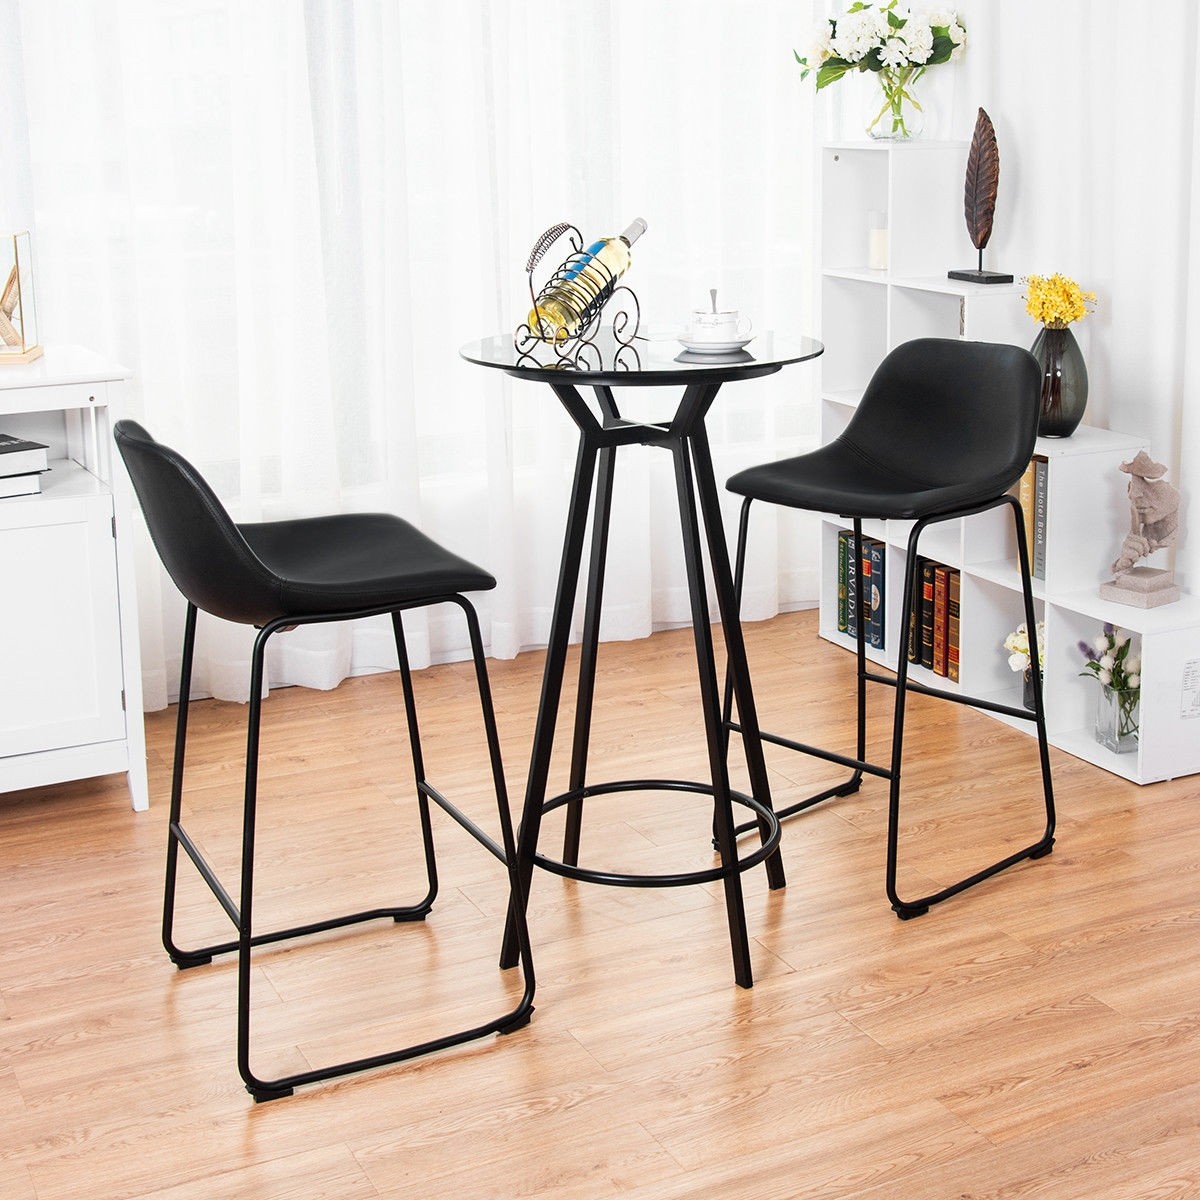 2-Set PU Leather Pub Barstools Side Chairs With Backrest